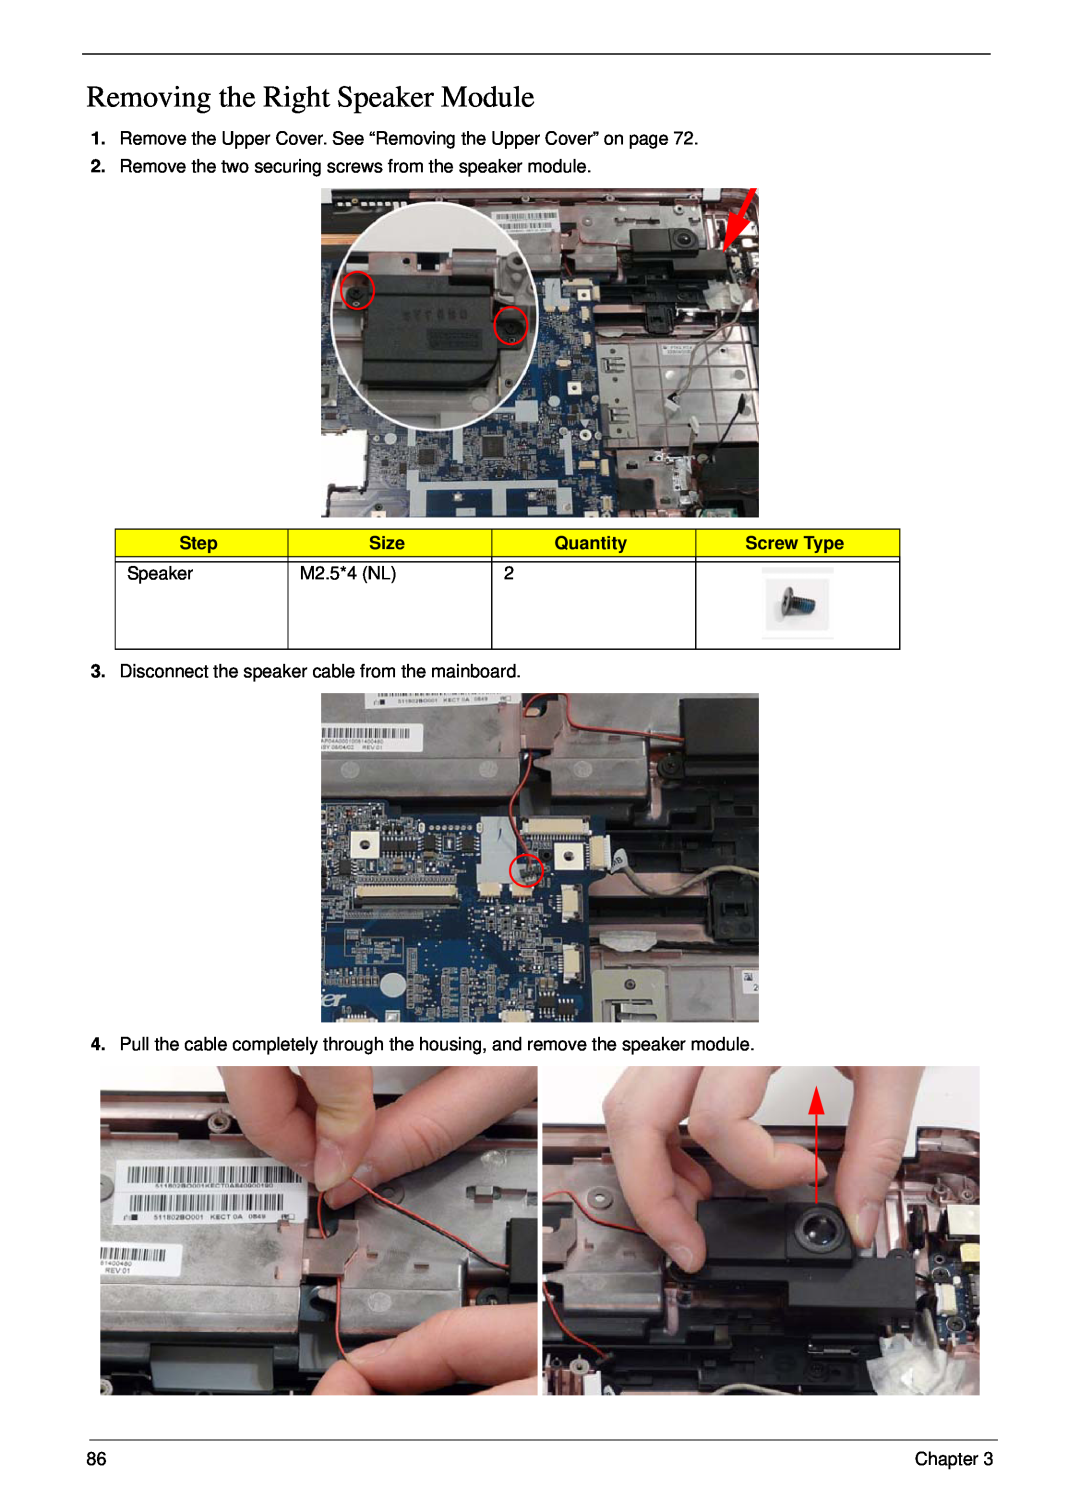 Acer 5530G manual Removing the Right Speaker Module, Remove the Upper Cover. See “Removing the Upper Cover” on page 